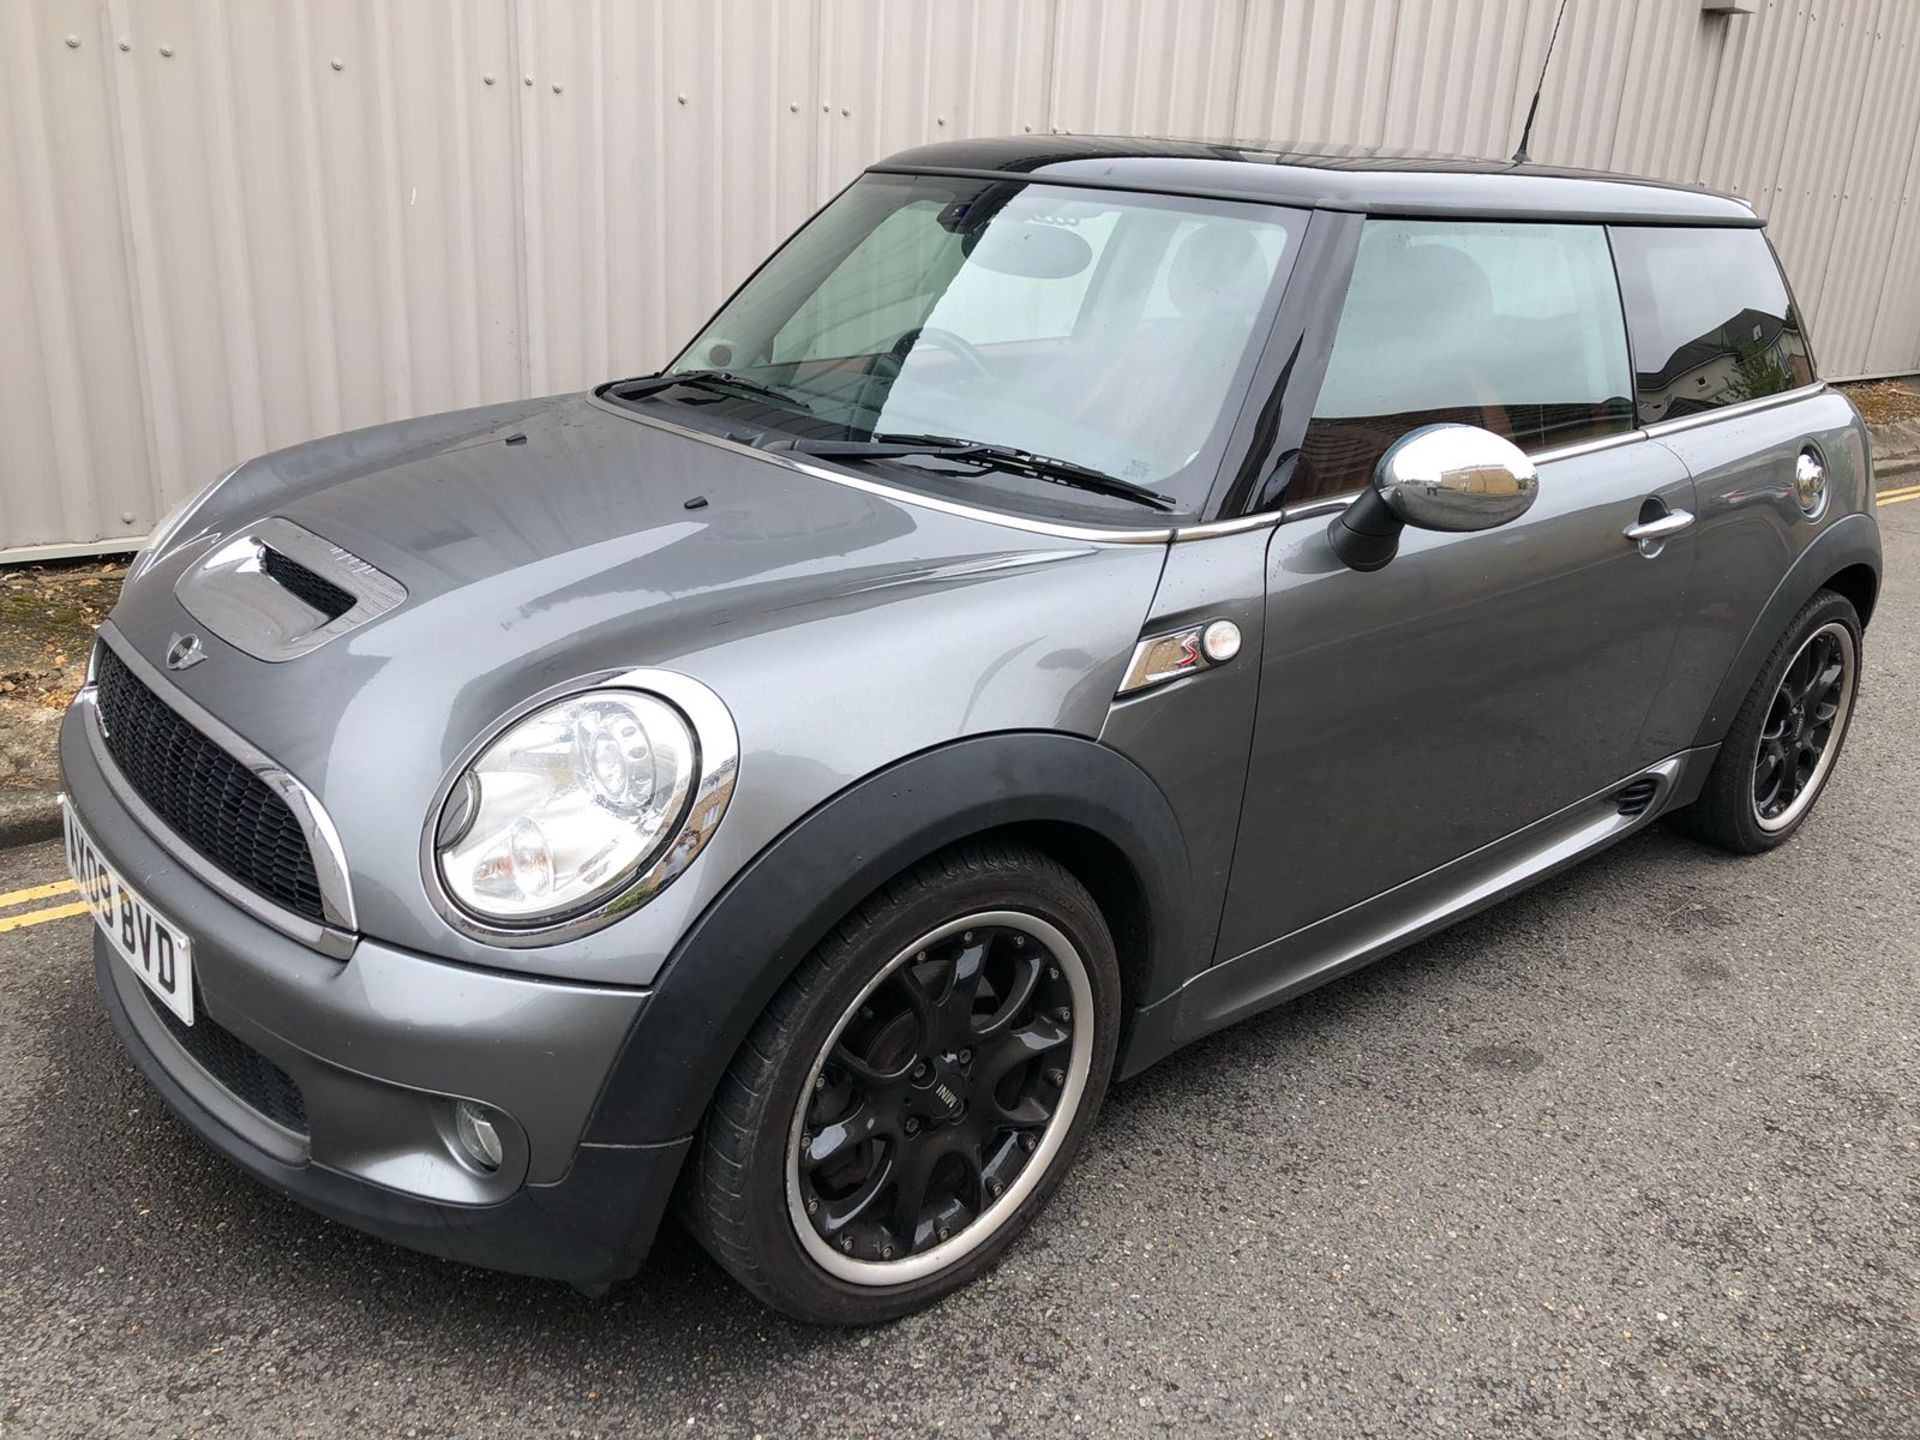 MINI COOPER S JOHN WORKS. 2009/09. 79,000 miles. Full history with 9 stamps in the book. - Bild 11 aus 19